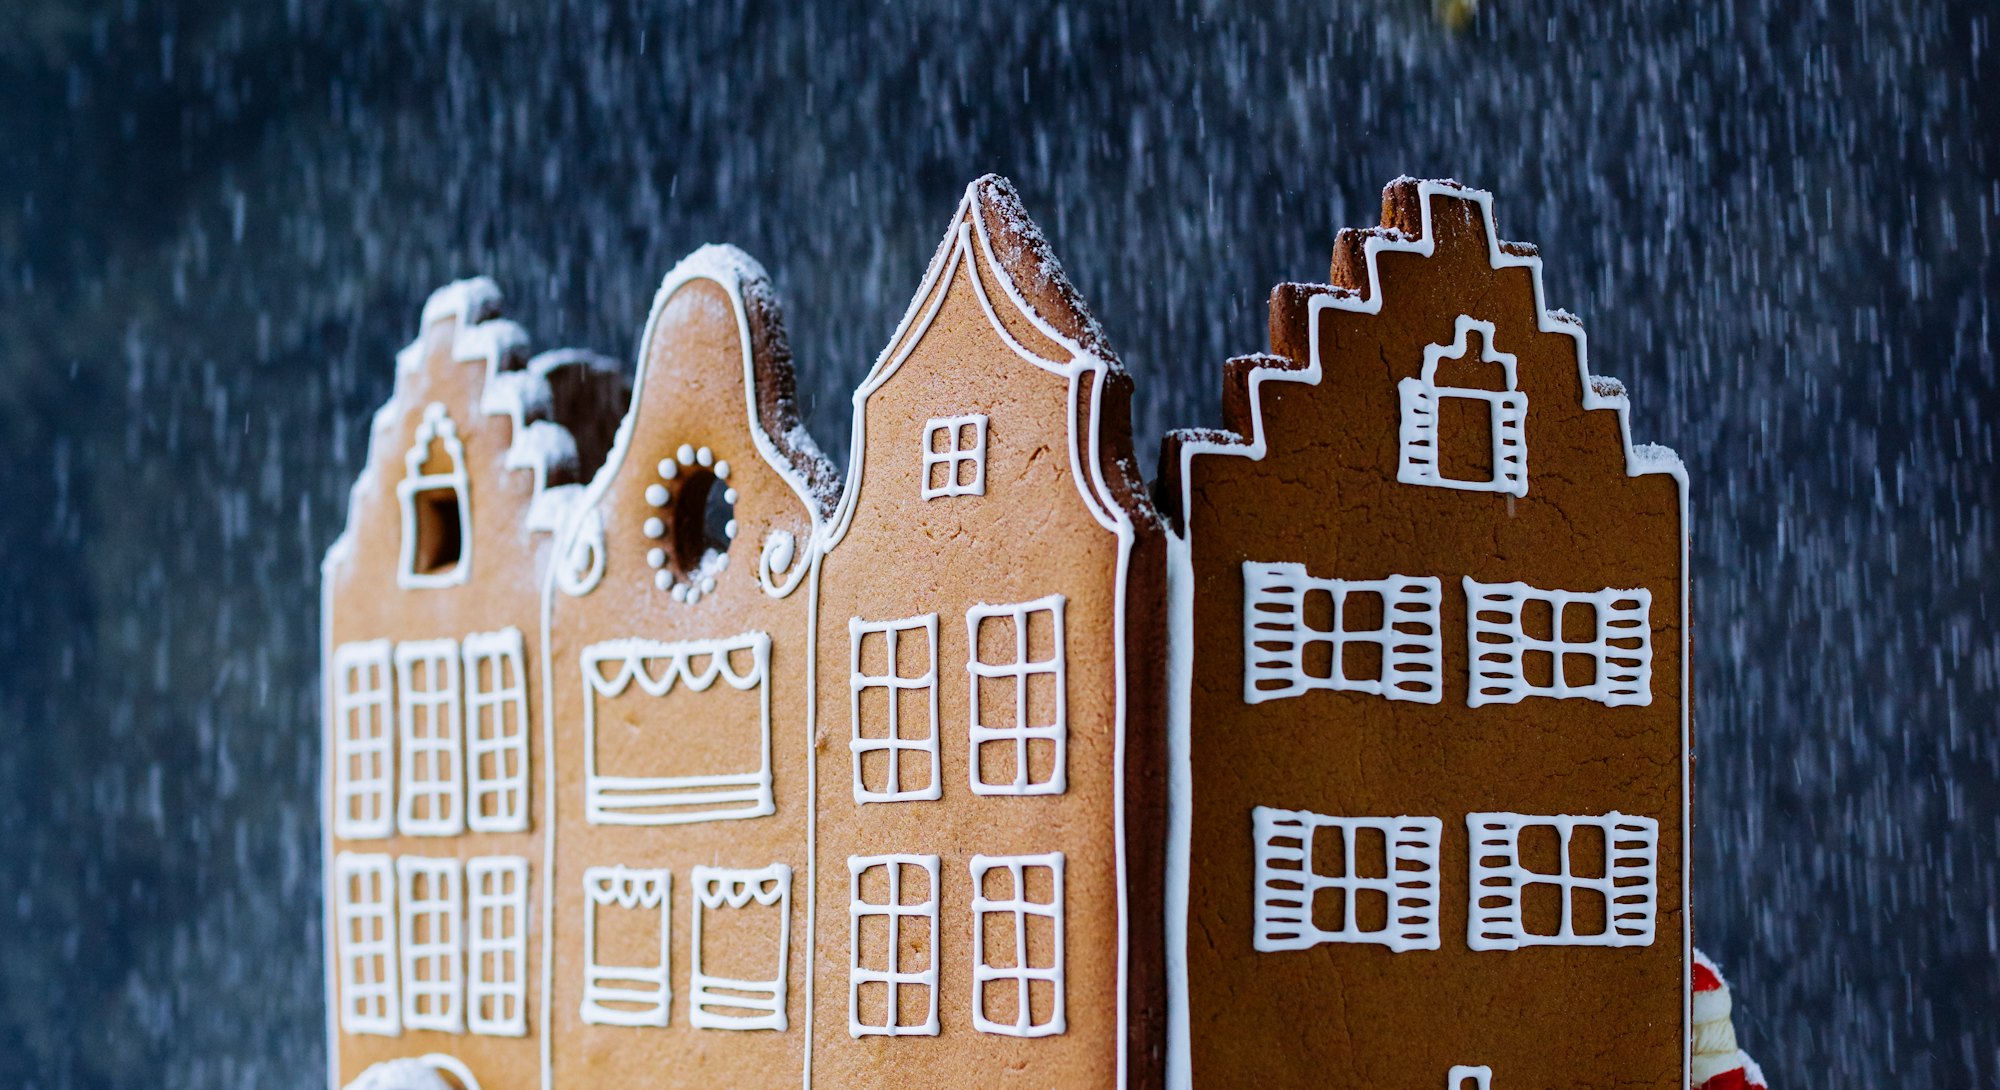 a beautiful gingerbread house